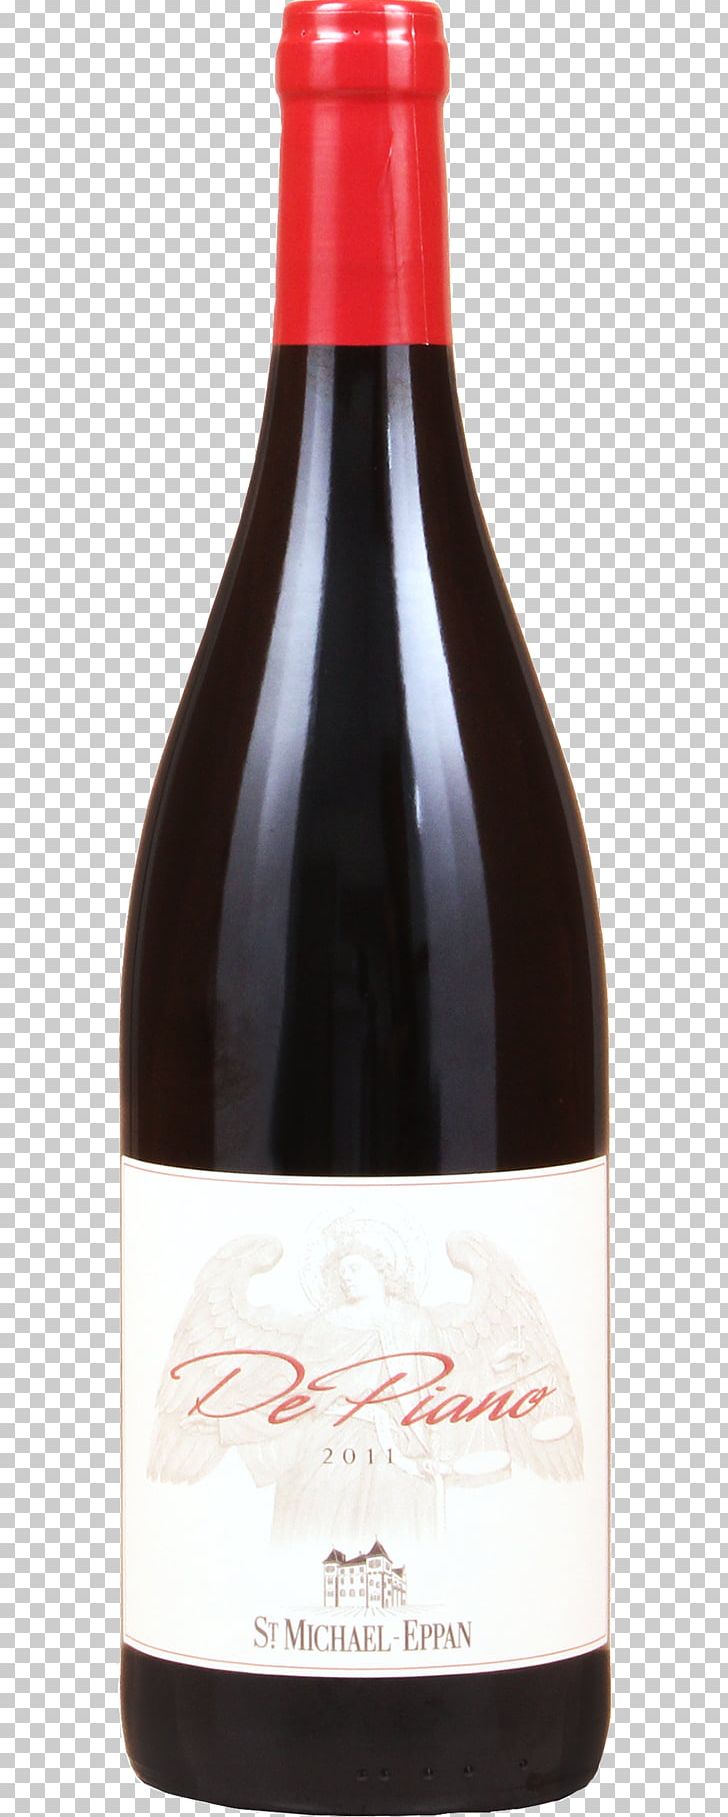 Burgundy Wine Pinot Noir Pinot Blanc Lambrusco PNG, Clipart, Alcoholic Beverage, Bottle, Burgundy Wine, Drink, Food Drinks Free PNG Download